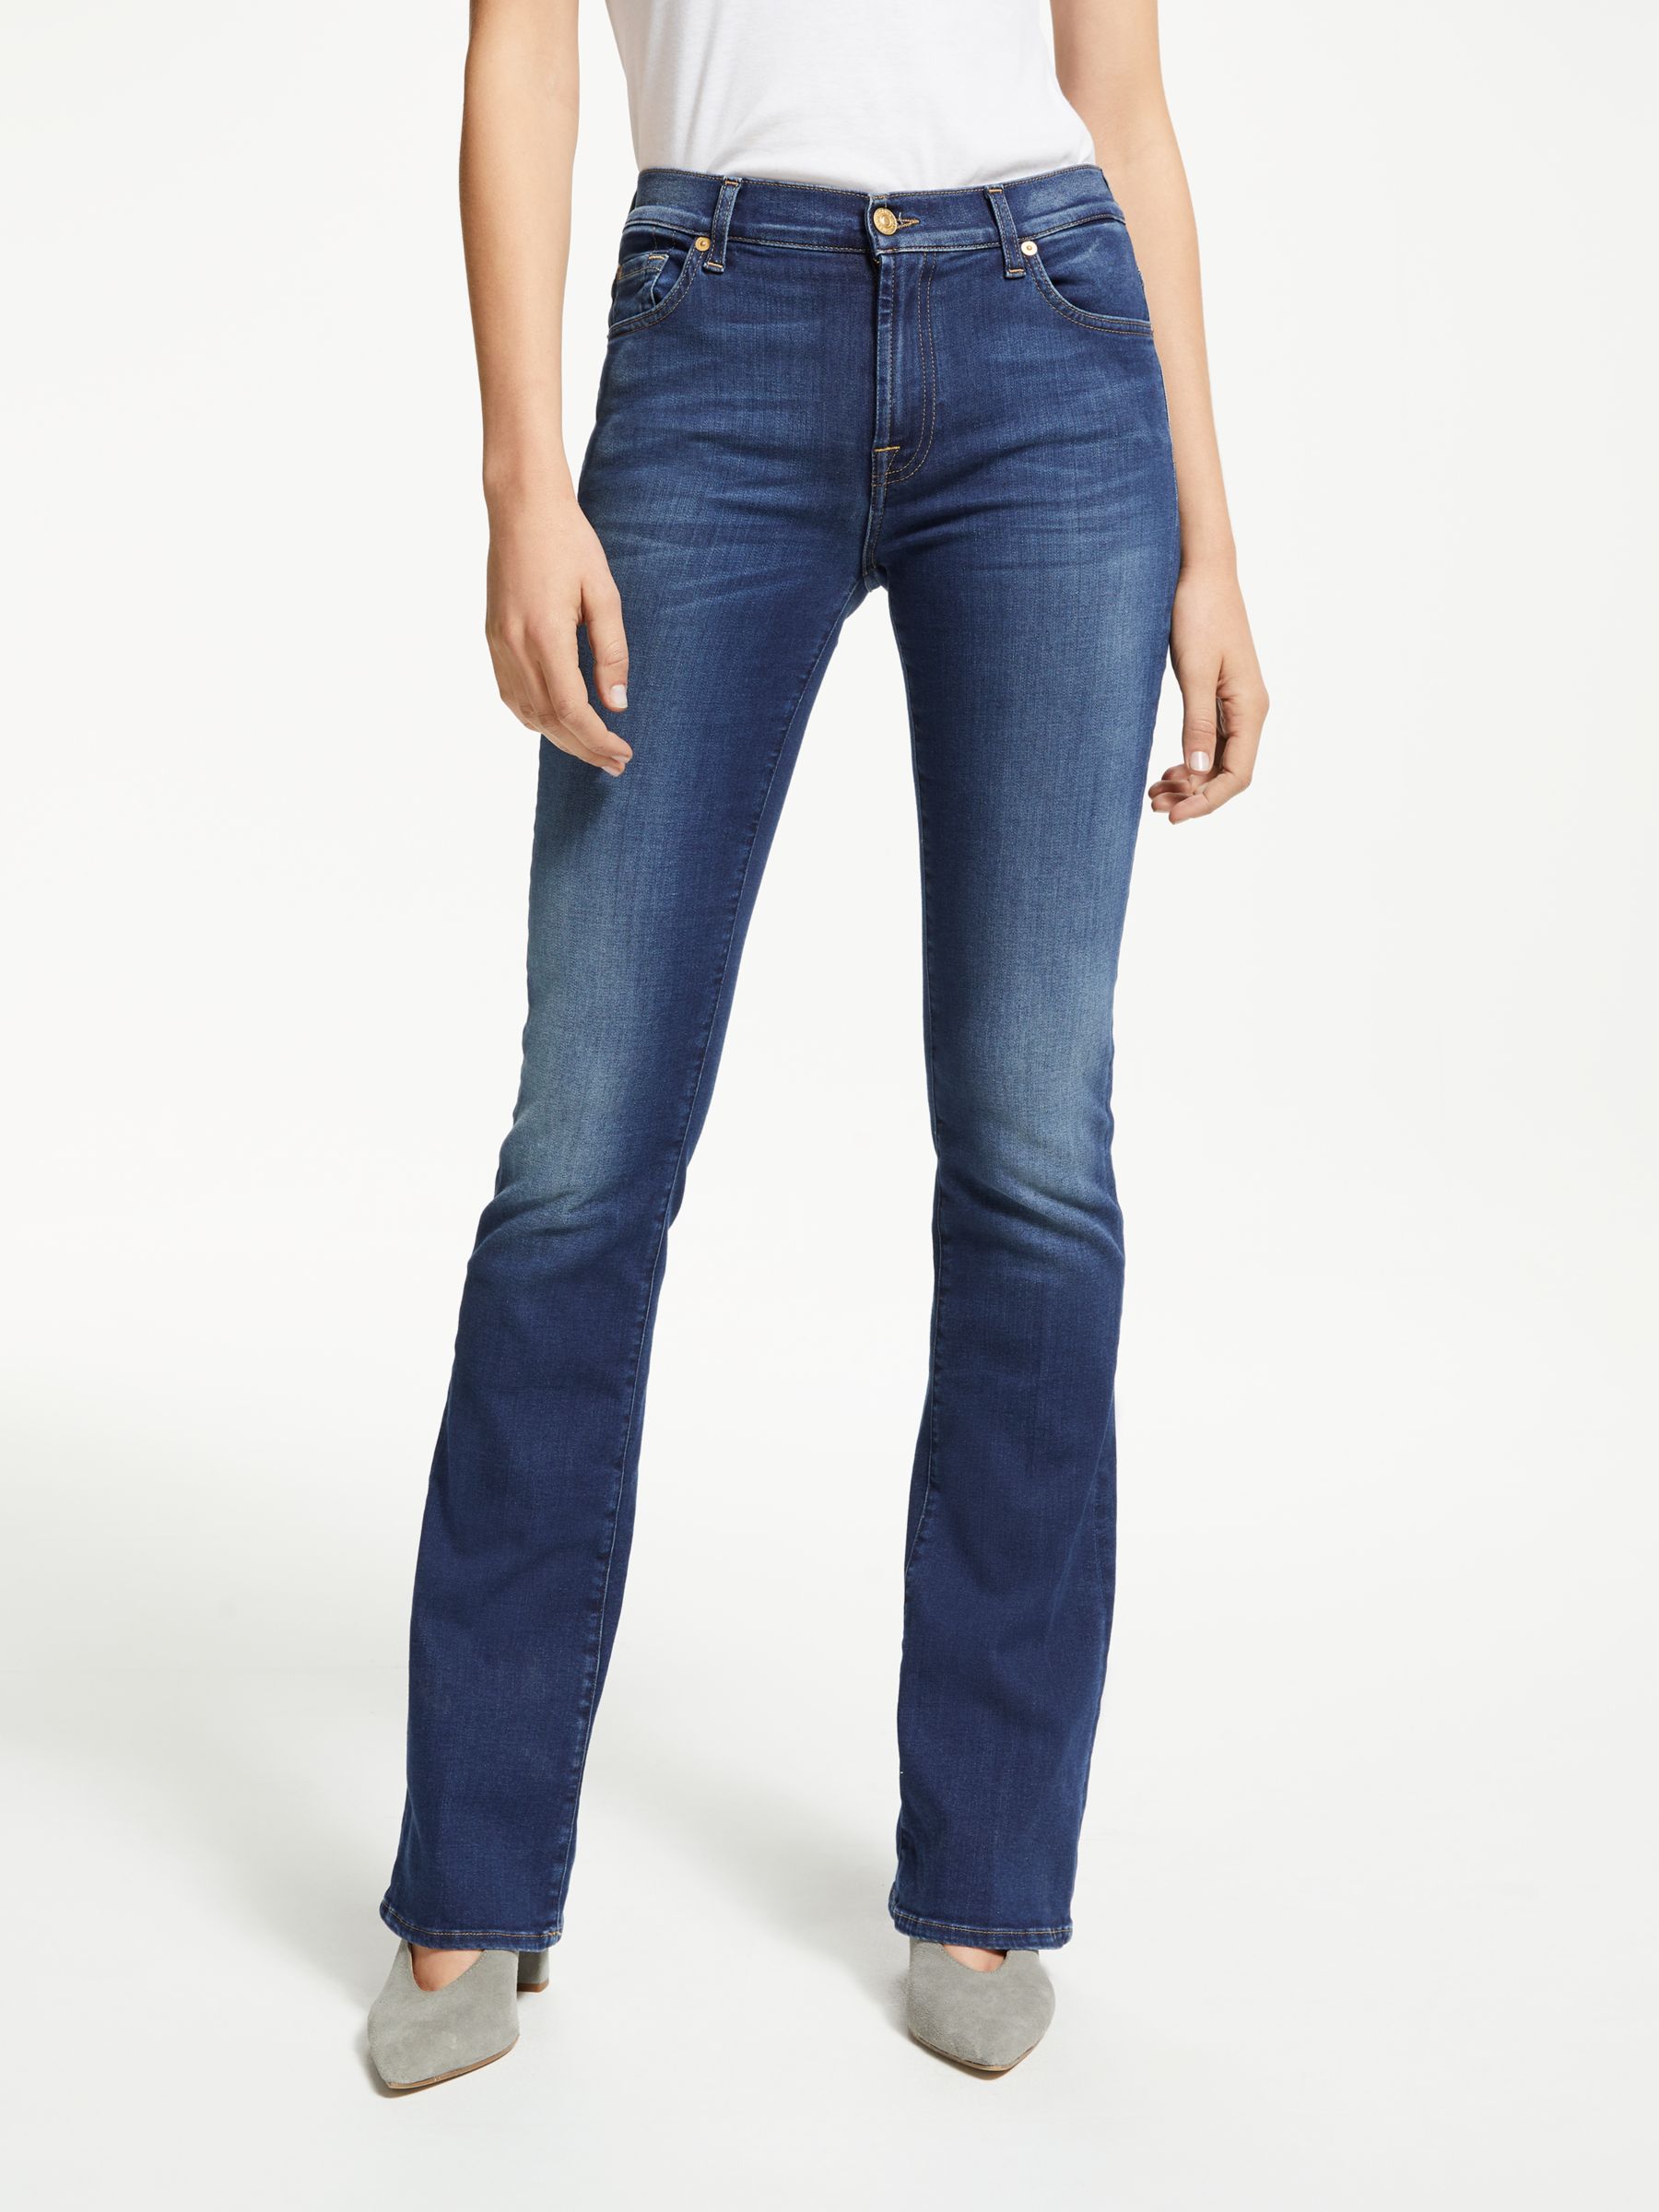 7 for all mankind jeans price